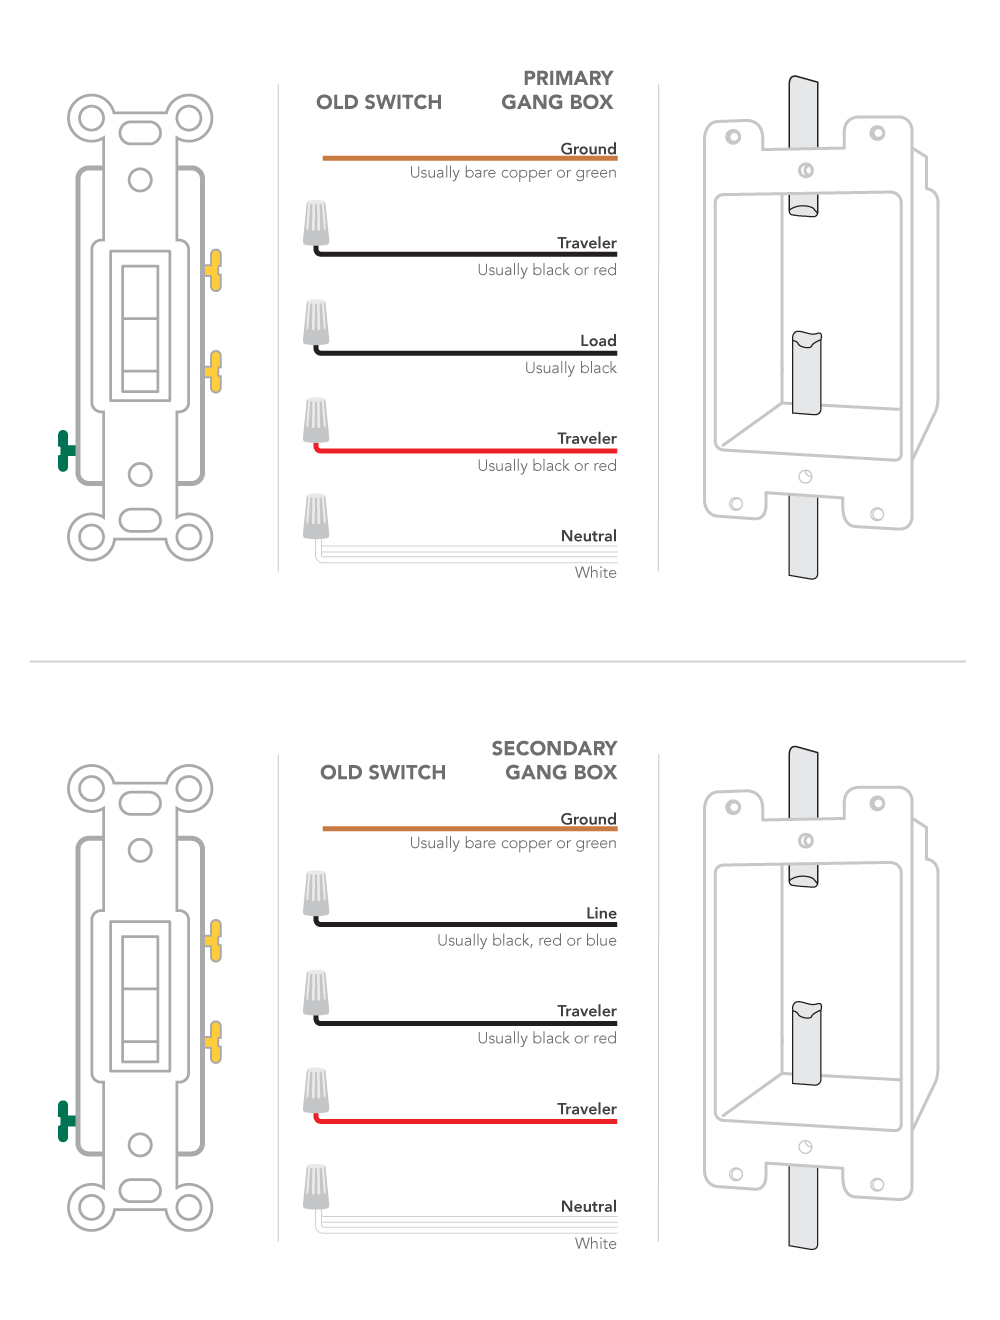 4 Way Light Switch With Dimmer Wiring Diagram from support.idevicesinc.com